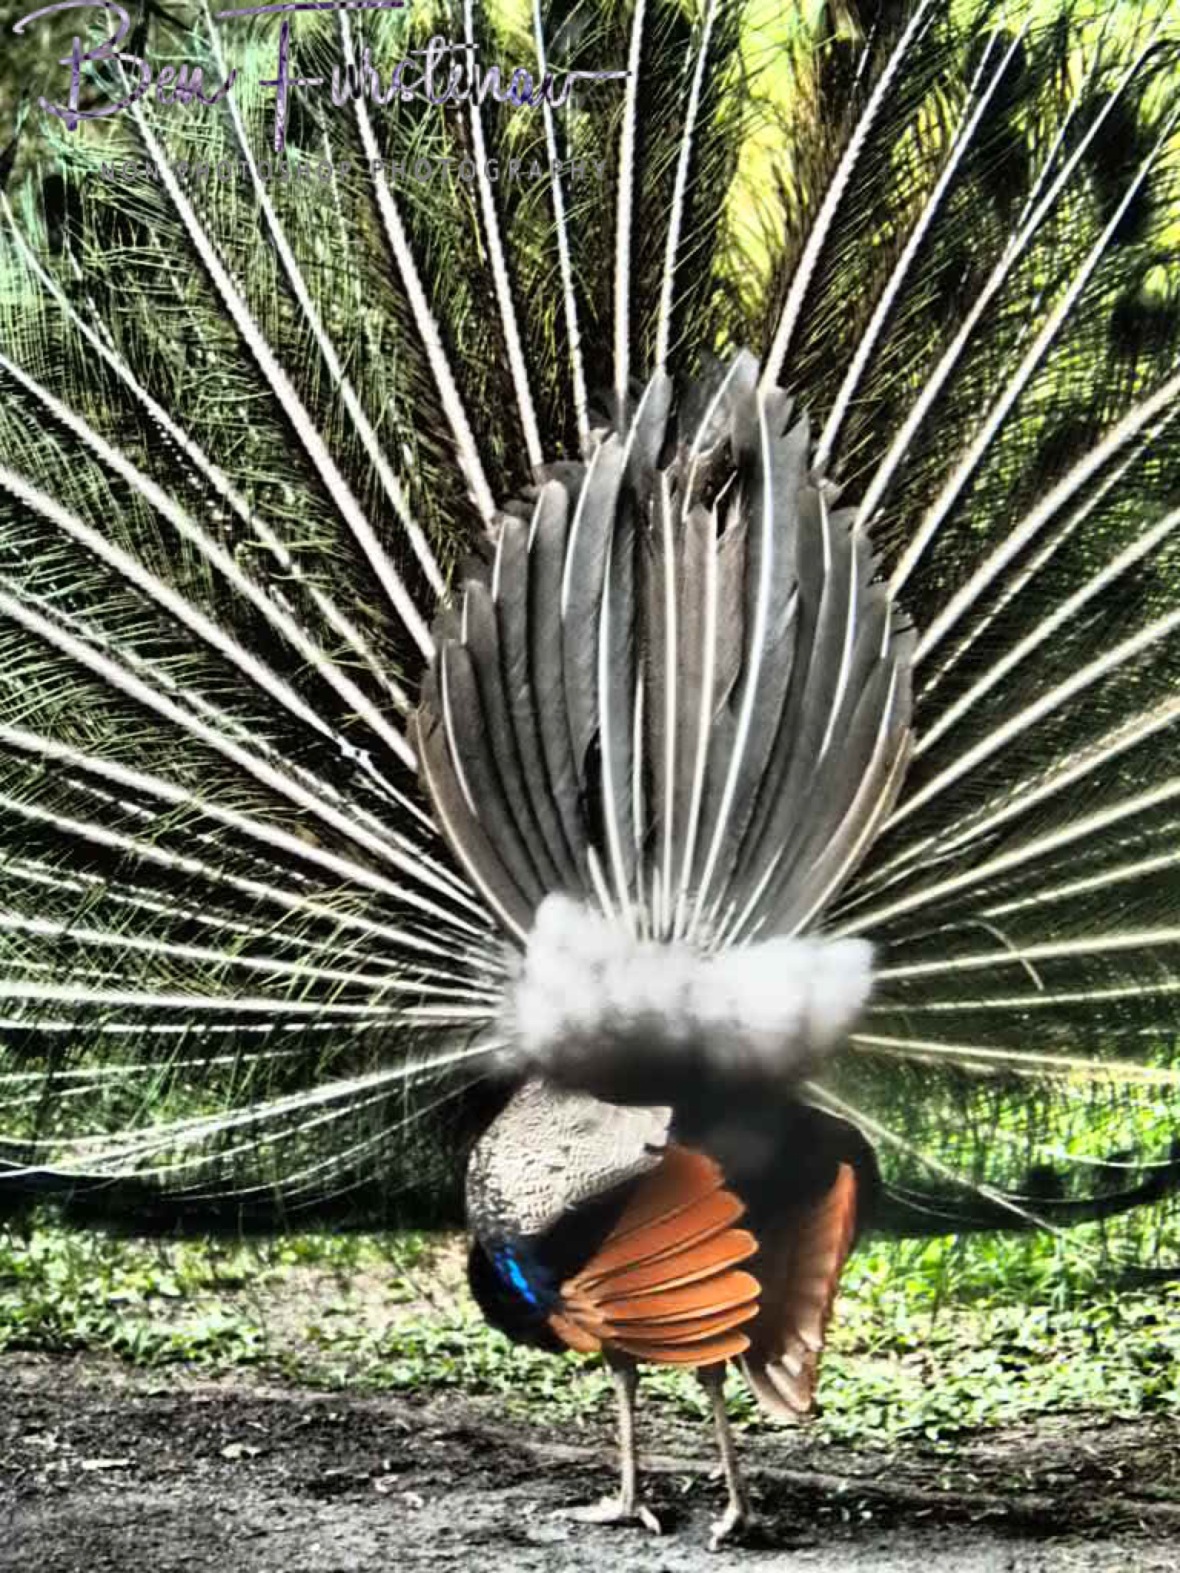 Peacock feathers backview at Babinda, Tropical Northern Queensland, Australia 